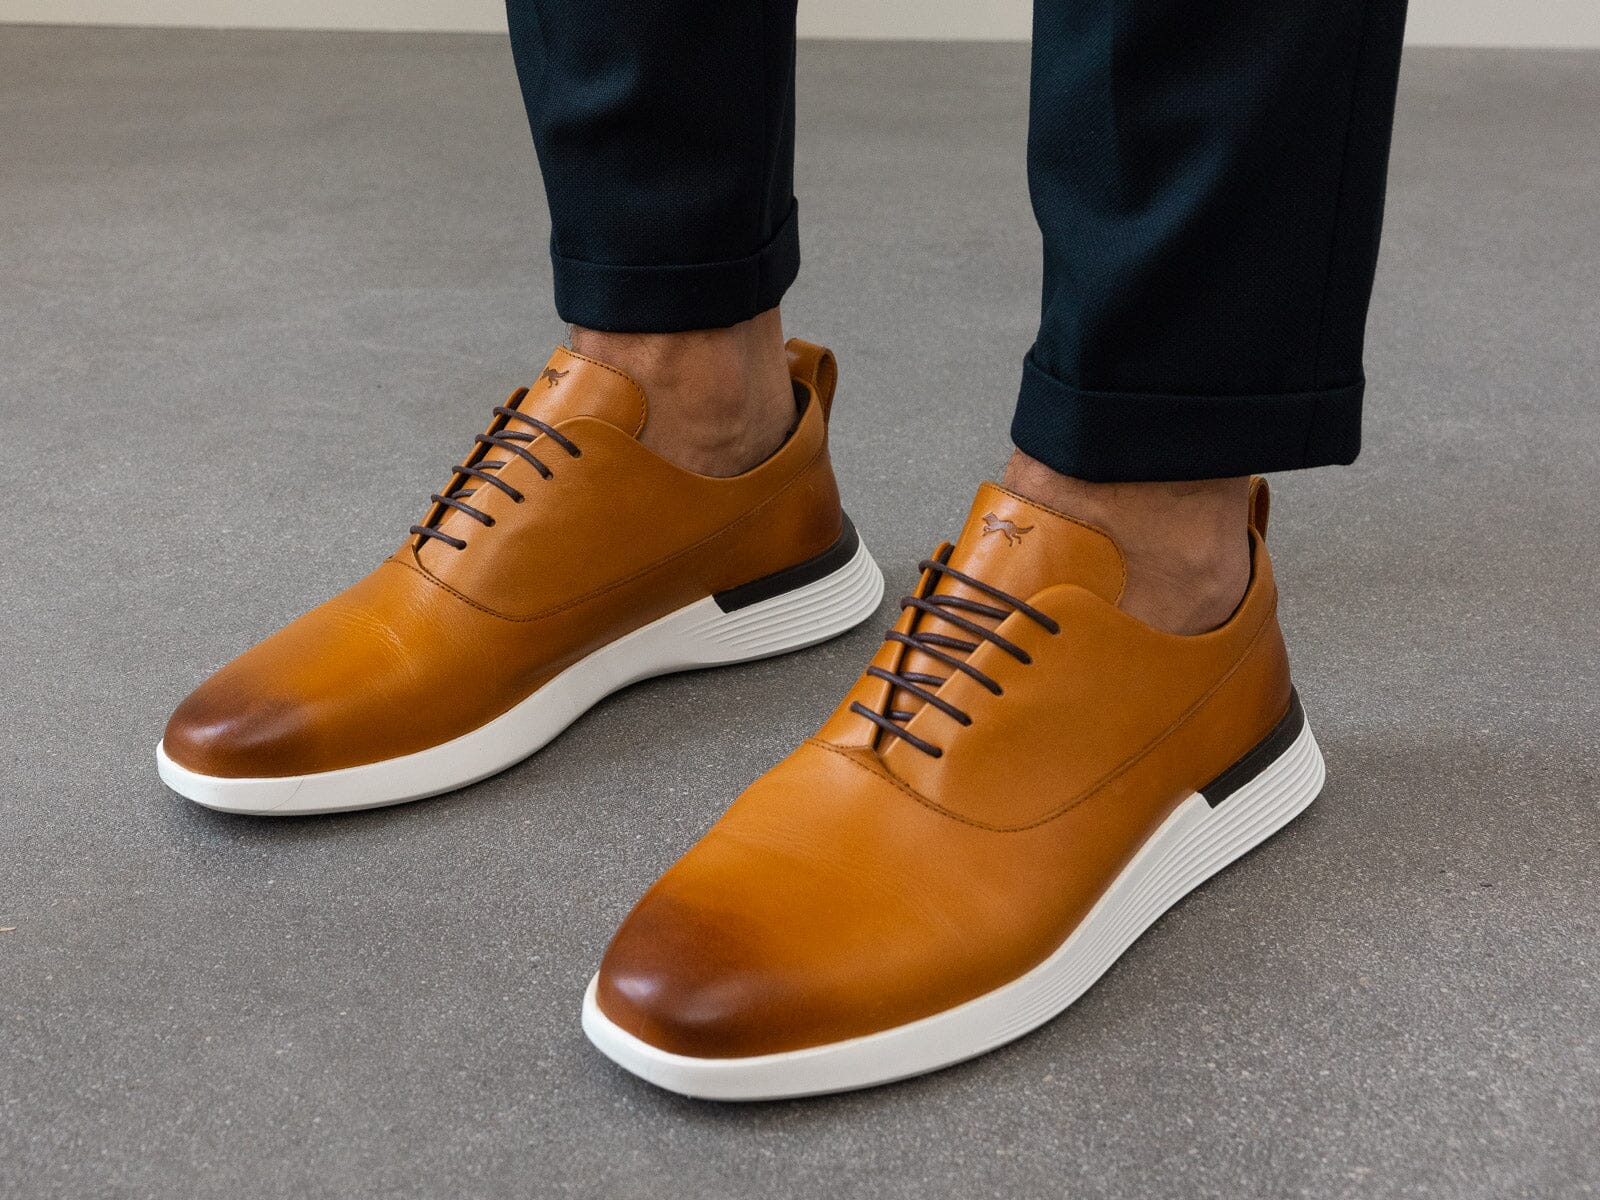 brown dress shoes outfit